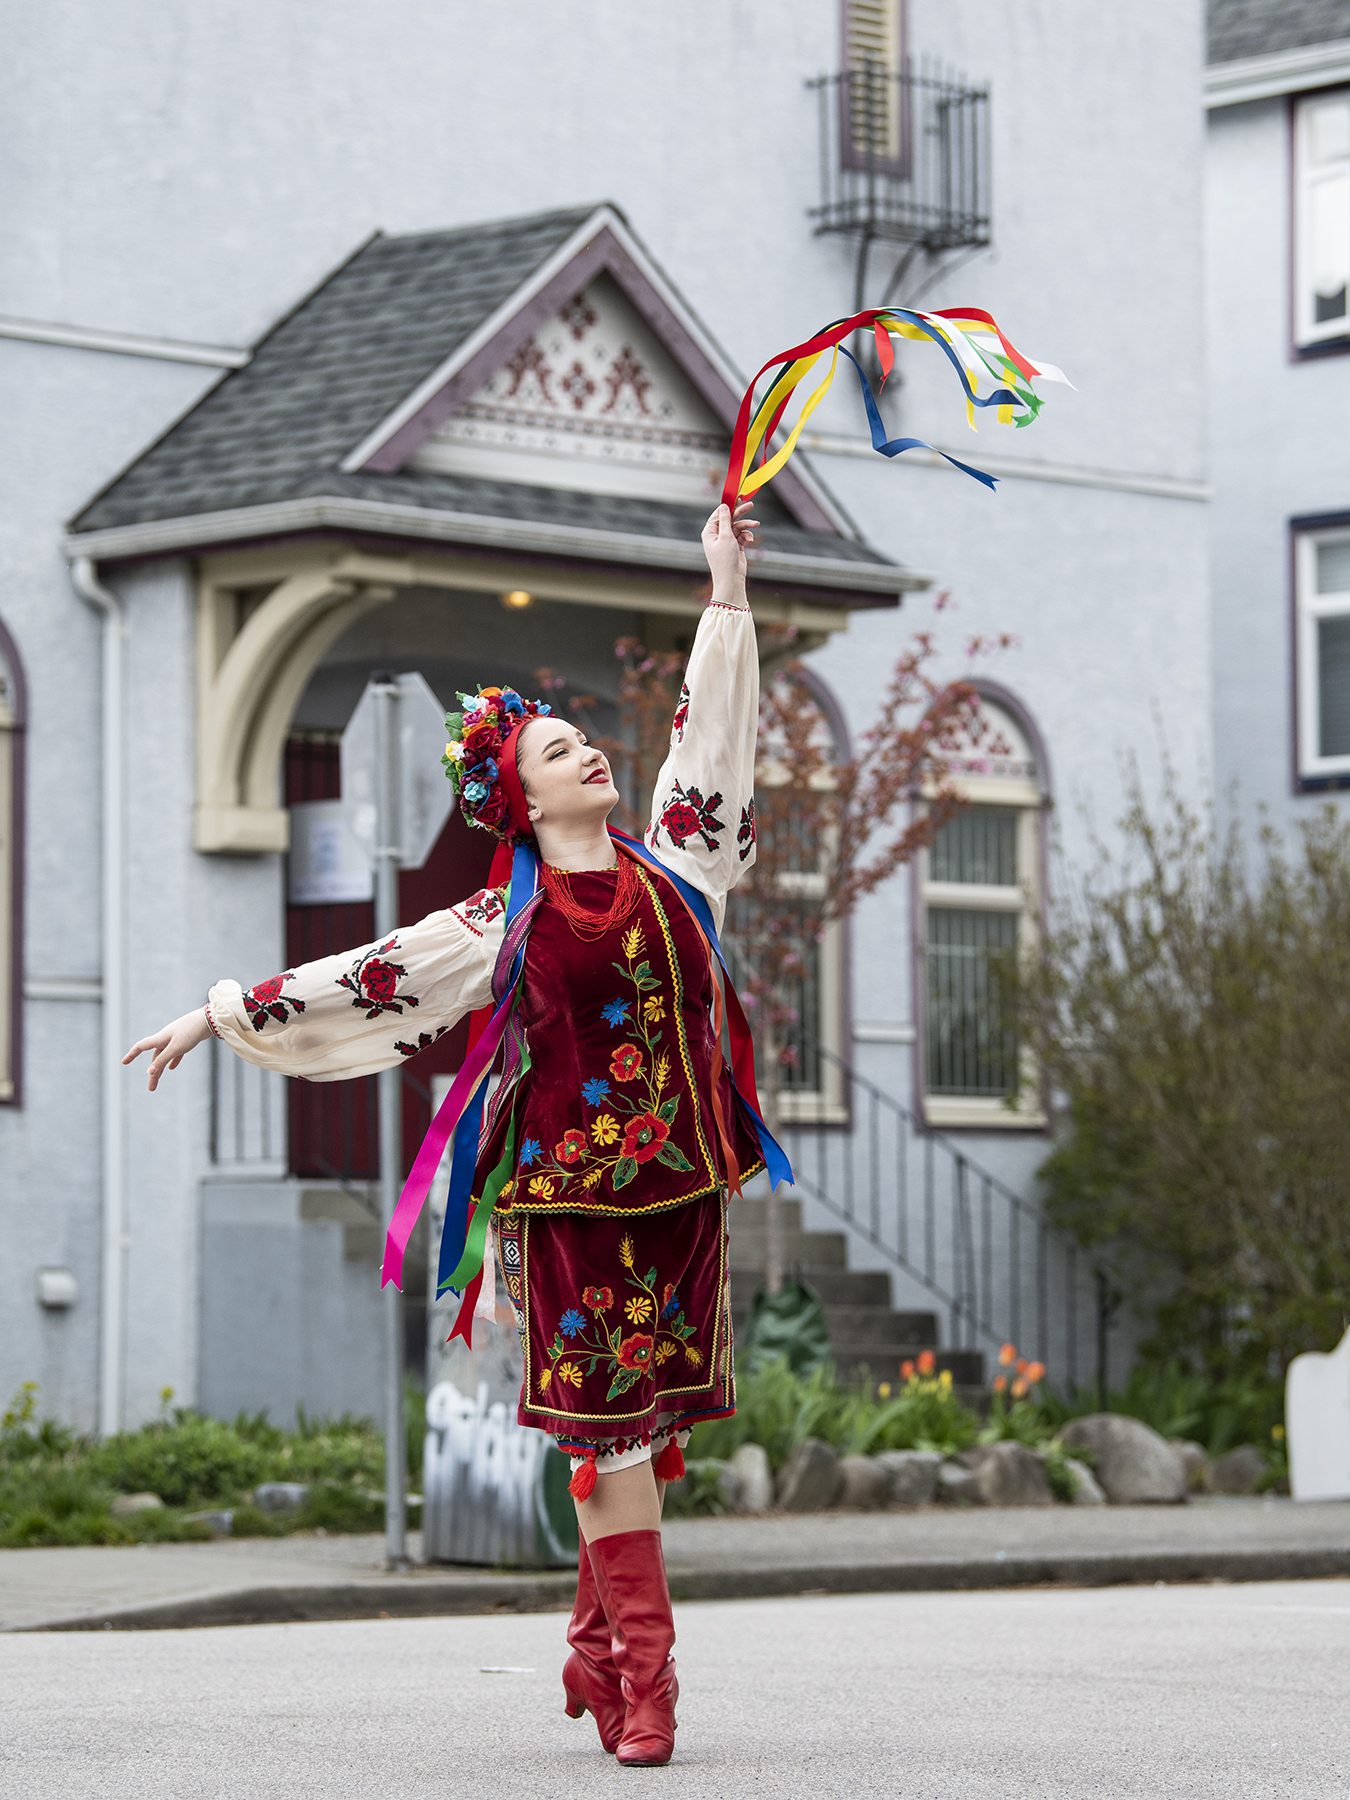 A young Ukrainian dancer is pictured in her colourful traditional dance costume in front of the Vancouver Ukraine Cultural Centre building